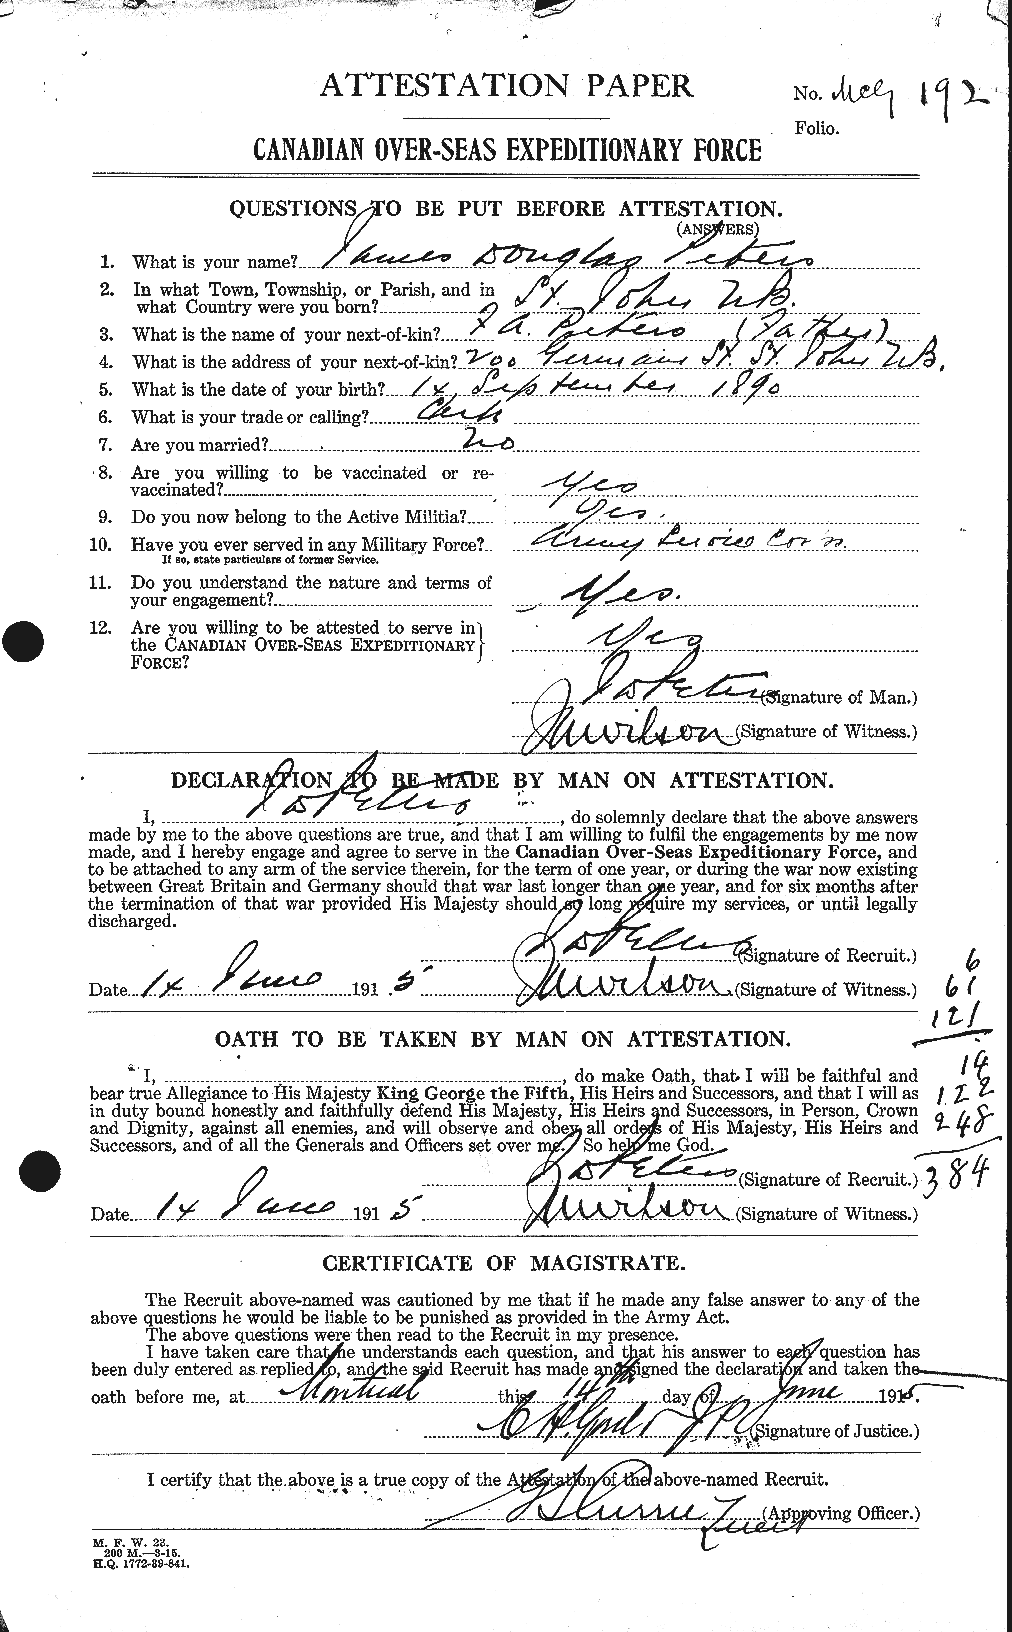 Personnel Records of the First World War - CEF 575525a